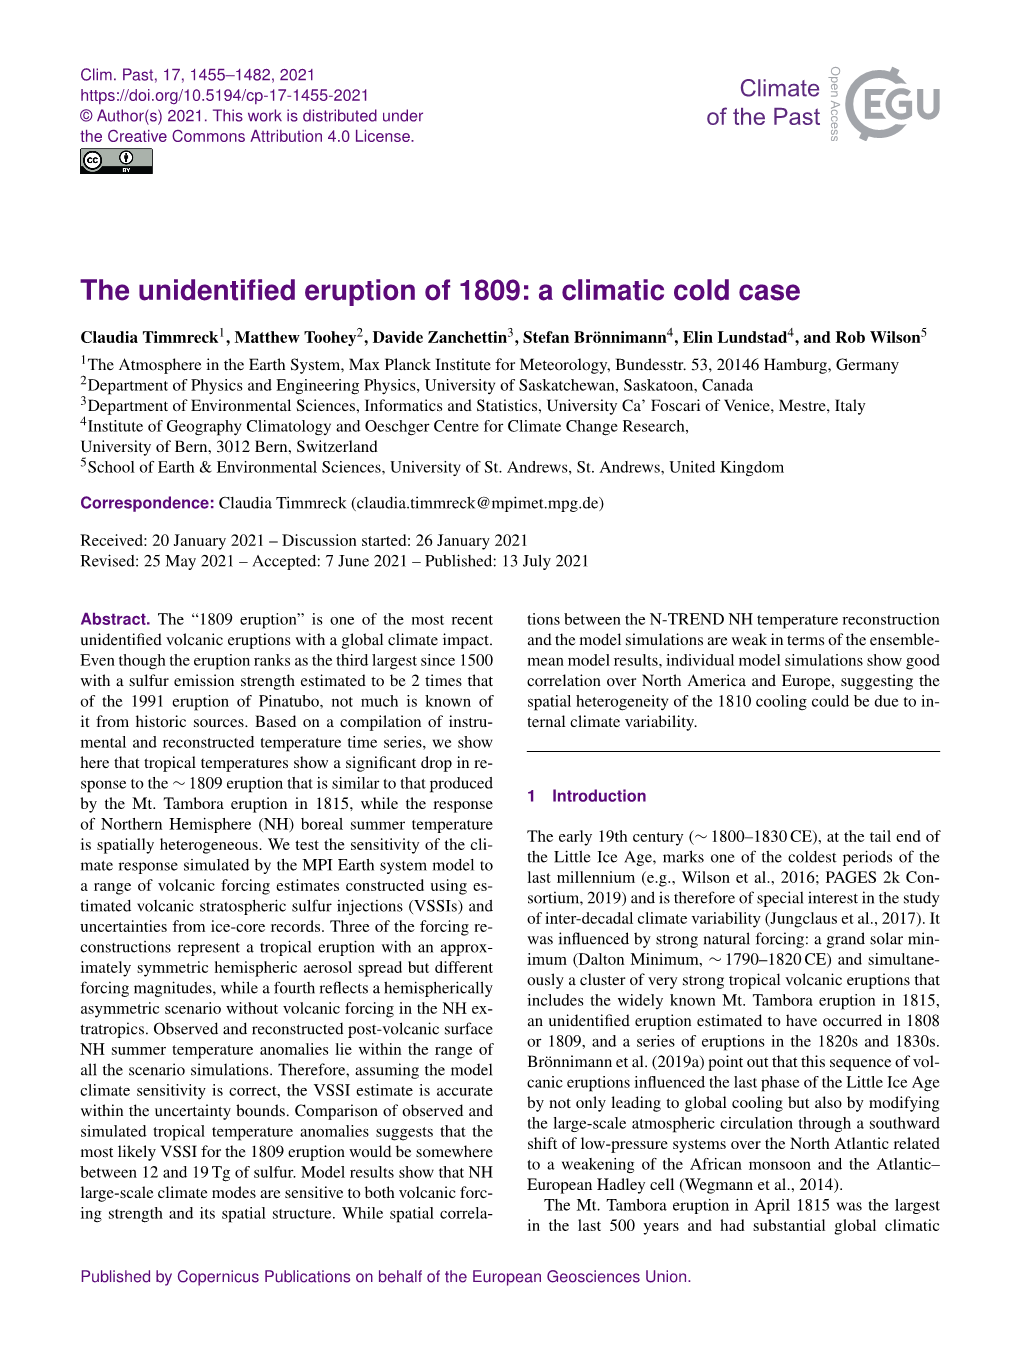 The Unidentified Eruption of 1809: a Climatic Cold Case